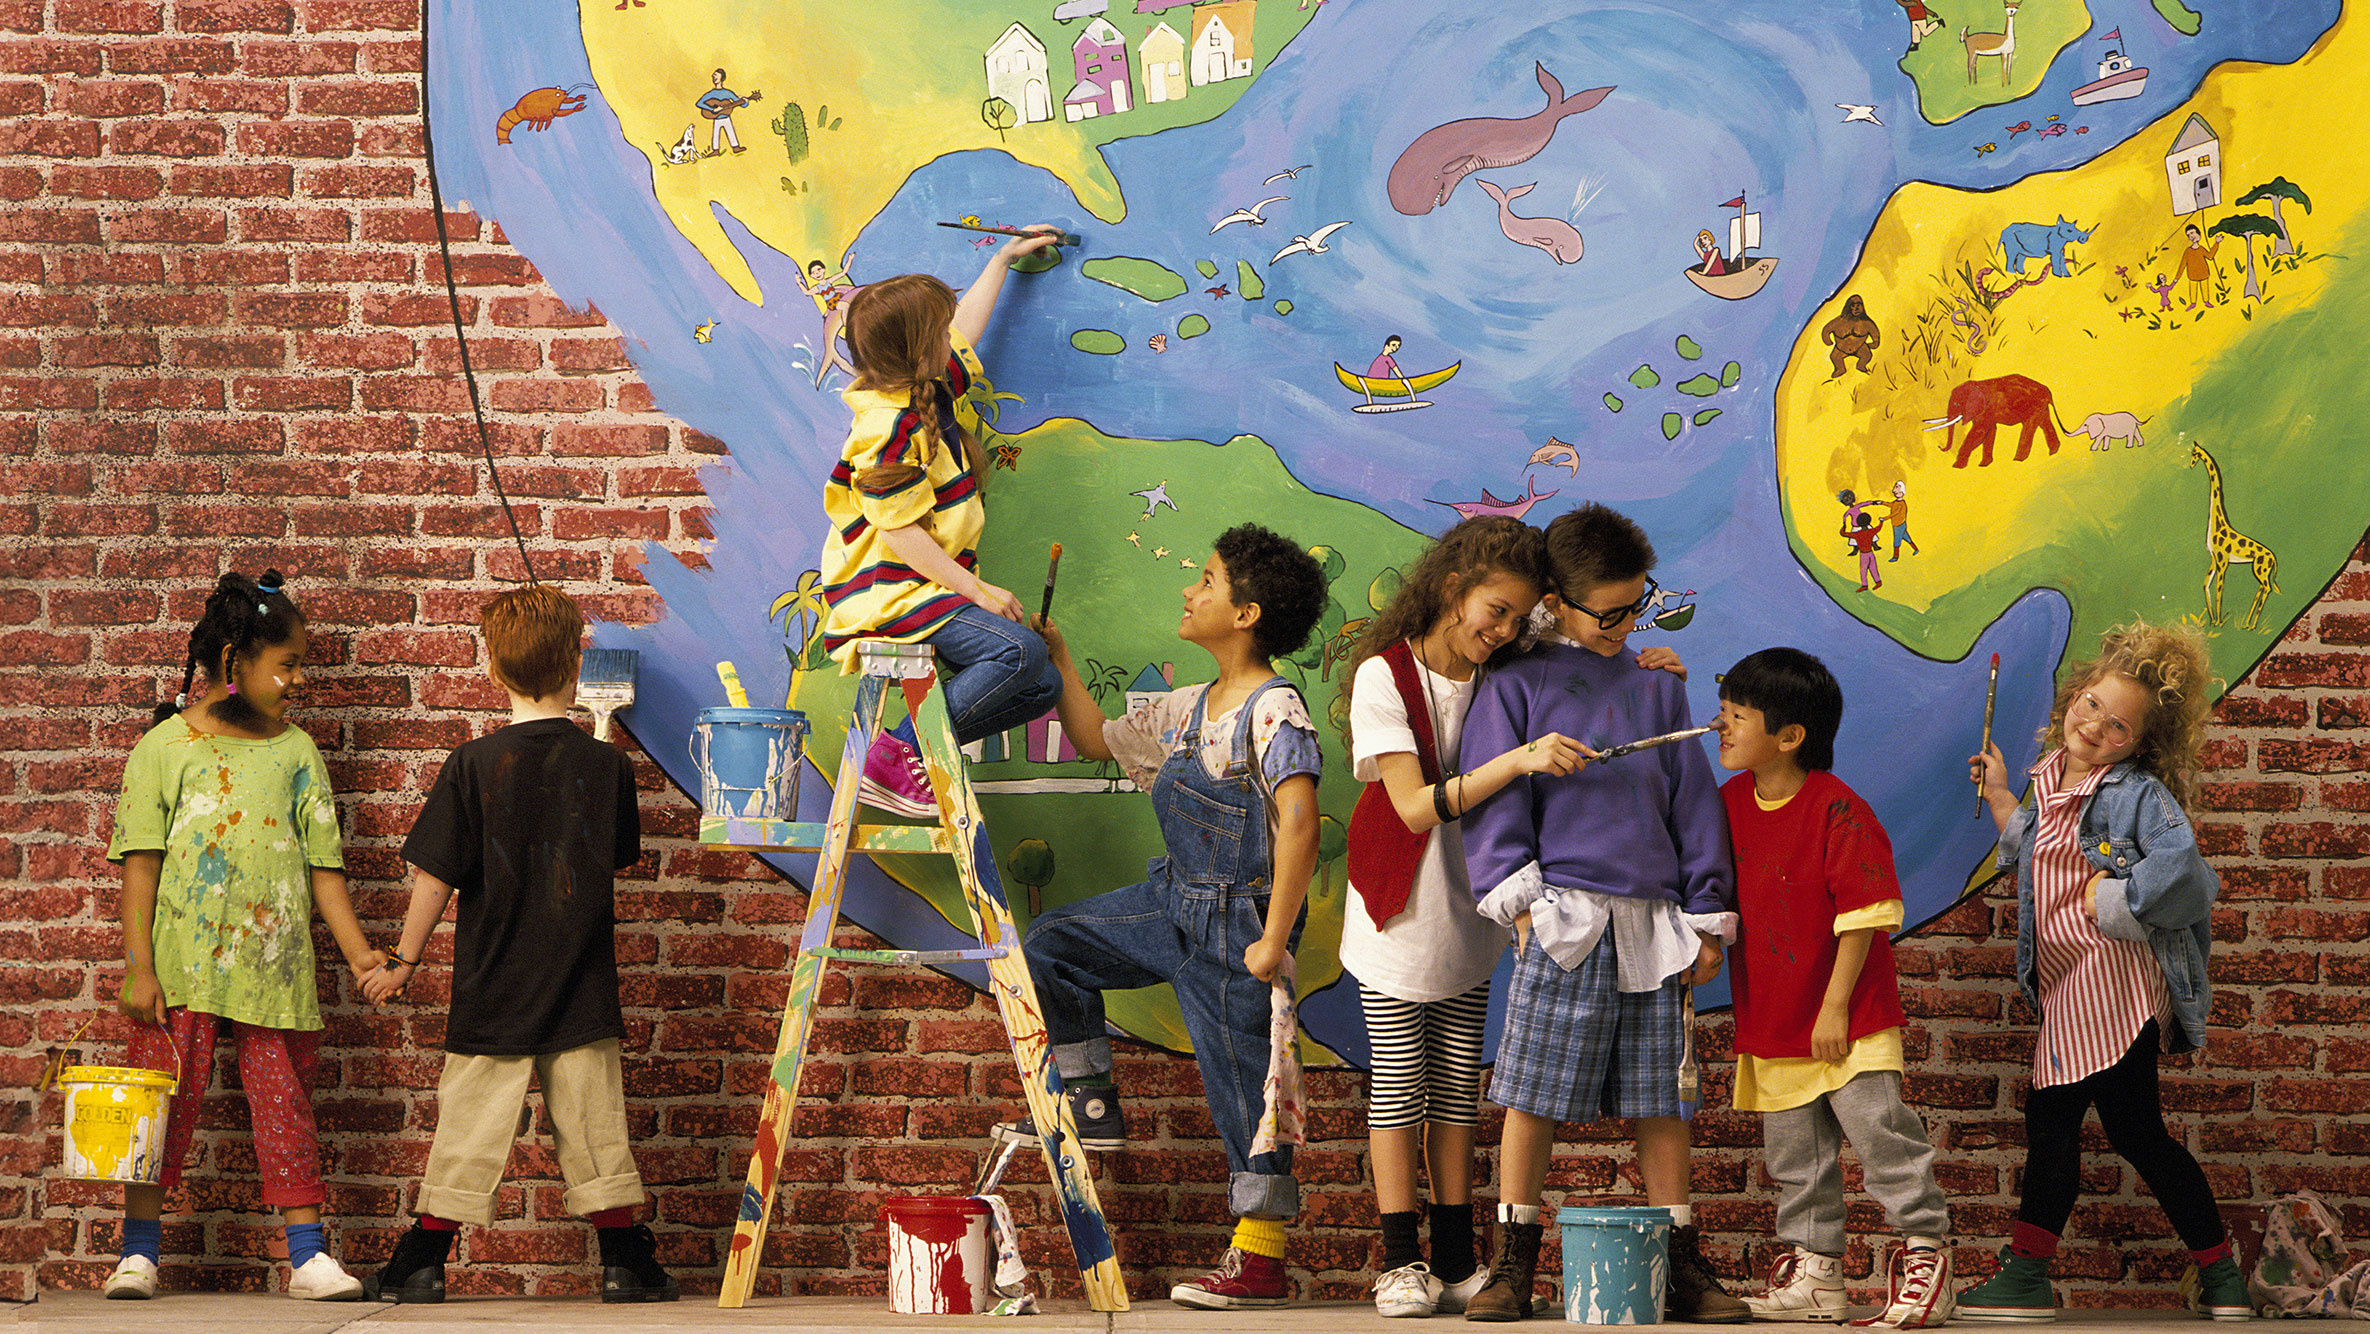 Children in colorful clothes paint a mural, and themselves a bit, on a brick wall.